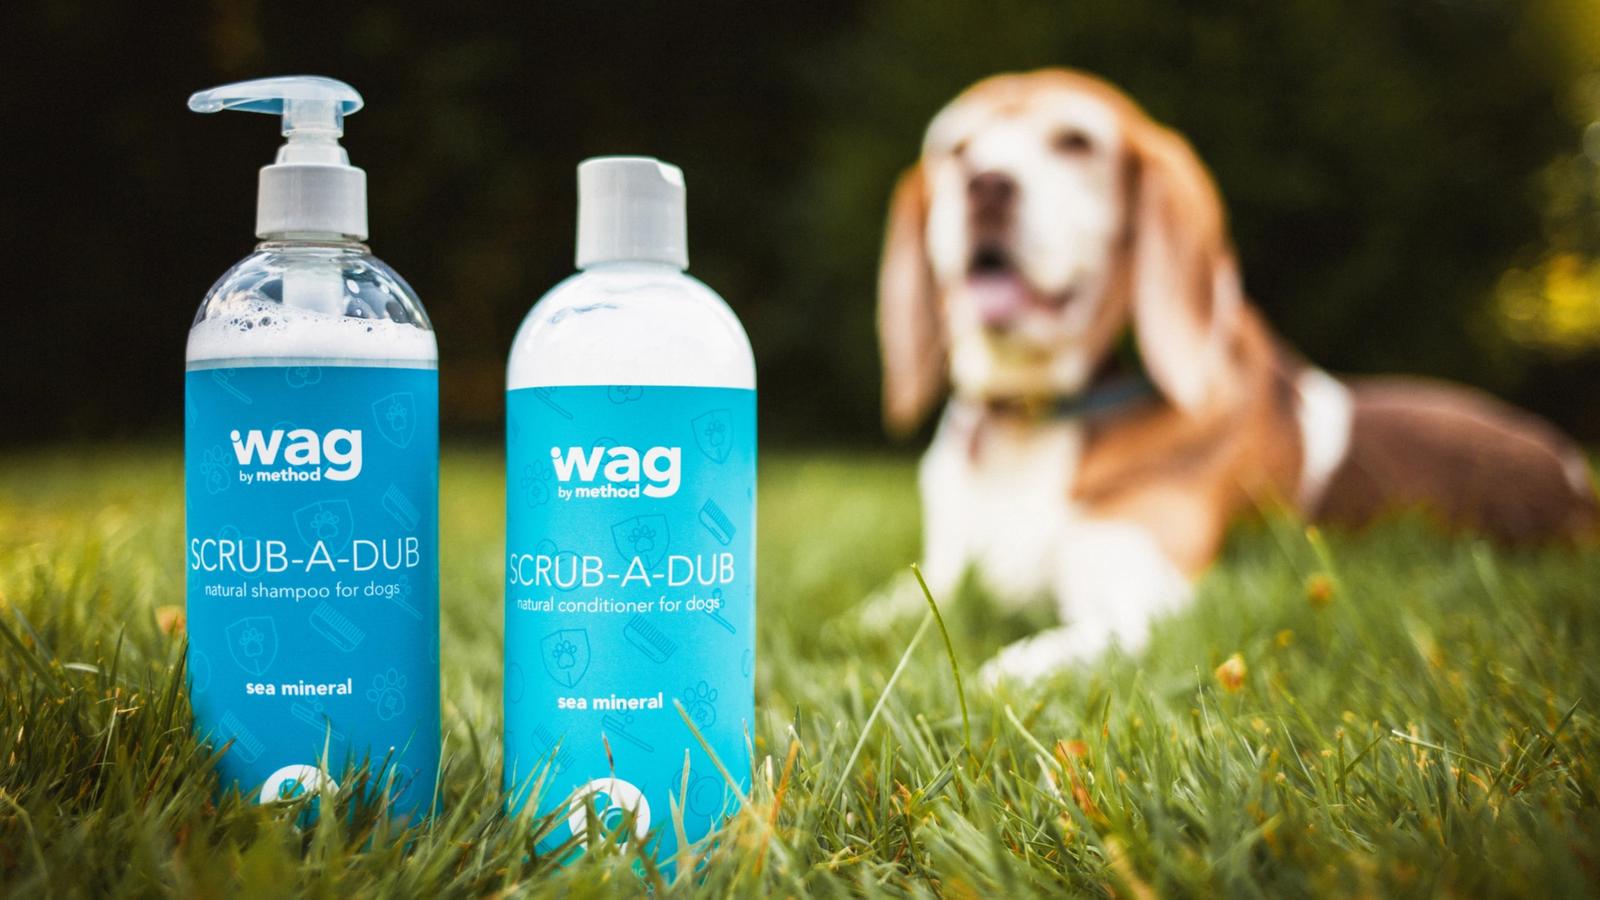 Wag by Method // brand extension